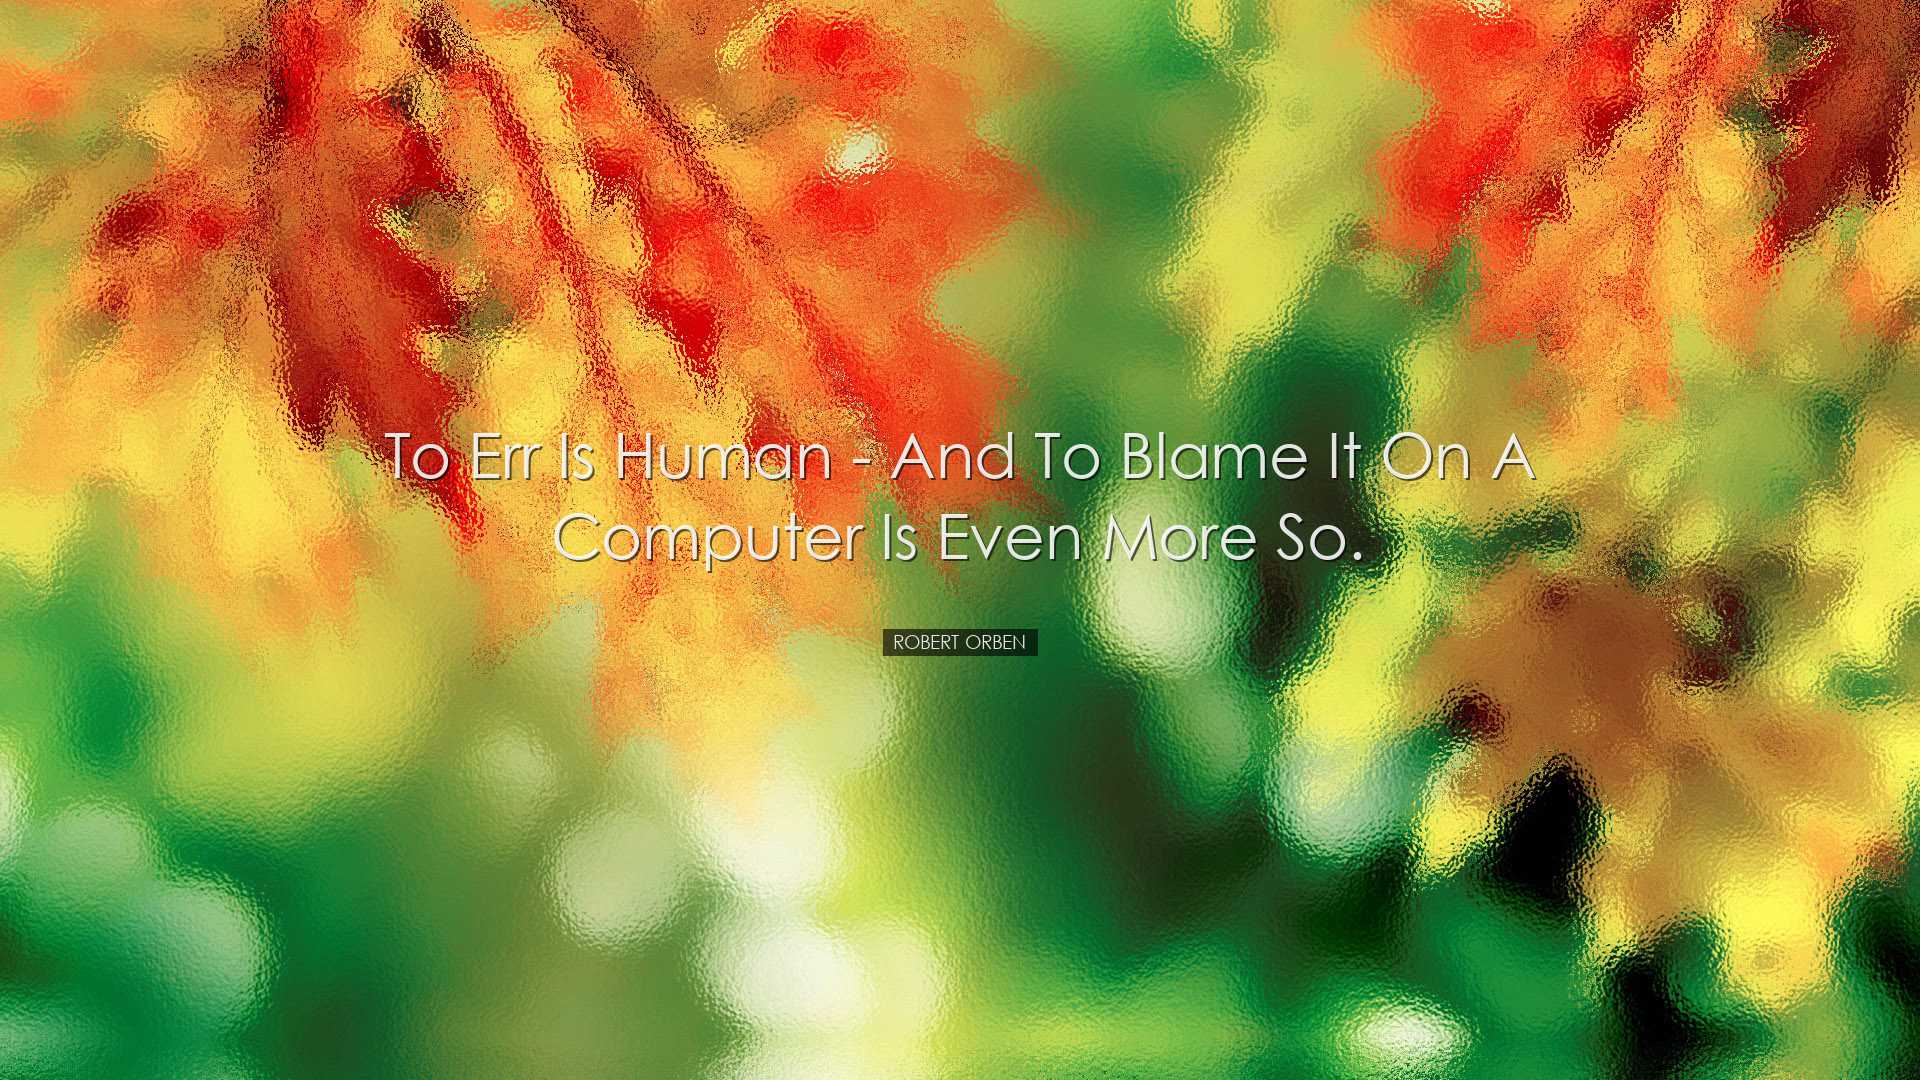 To err is human - and to blame it on a computer is even more so. -